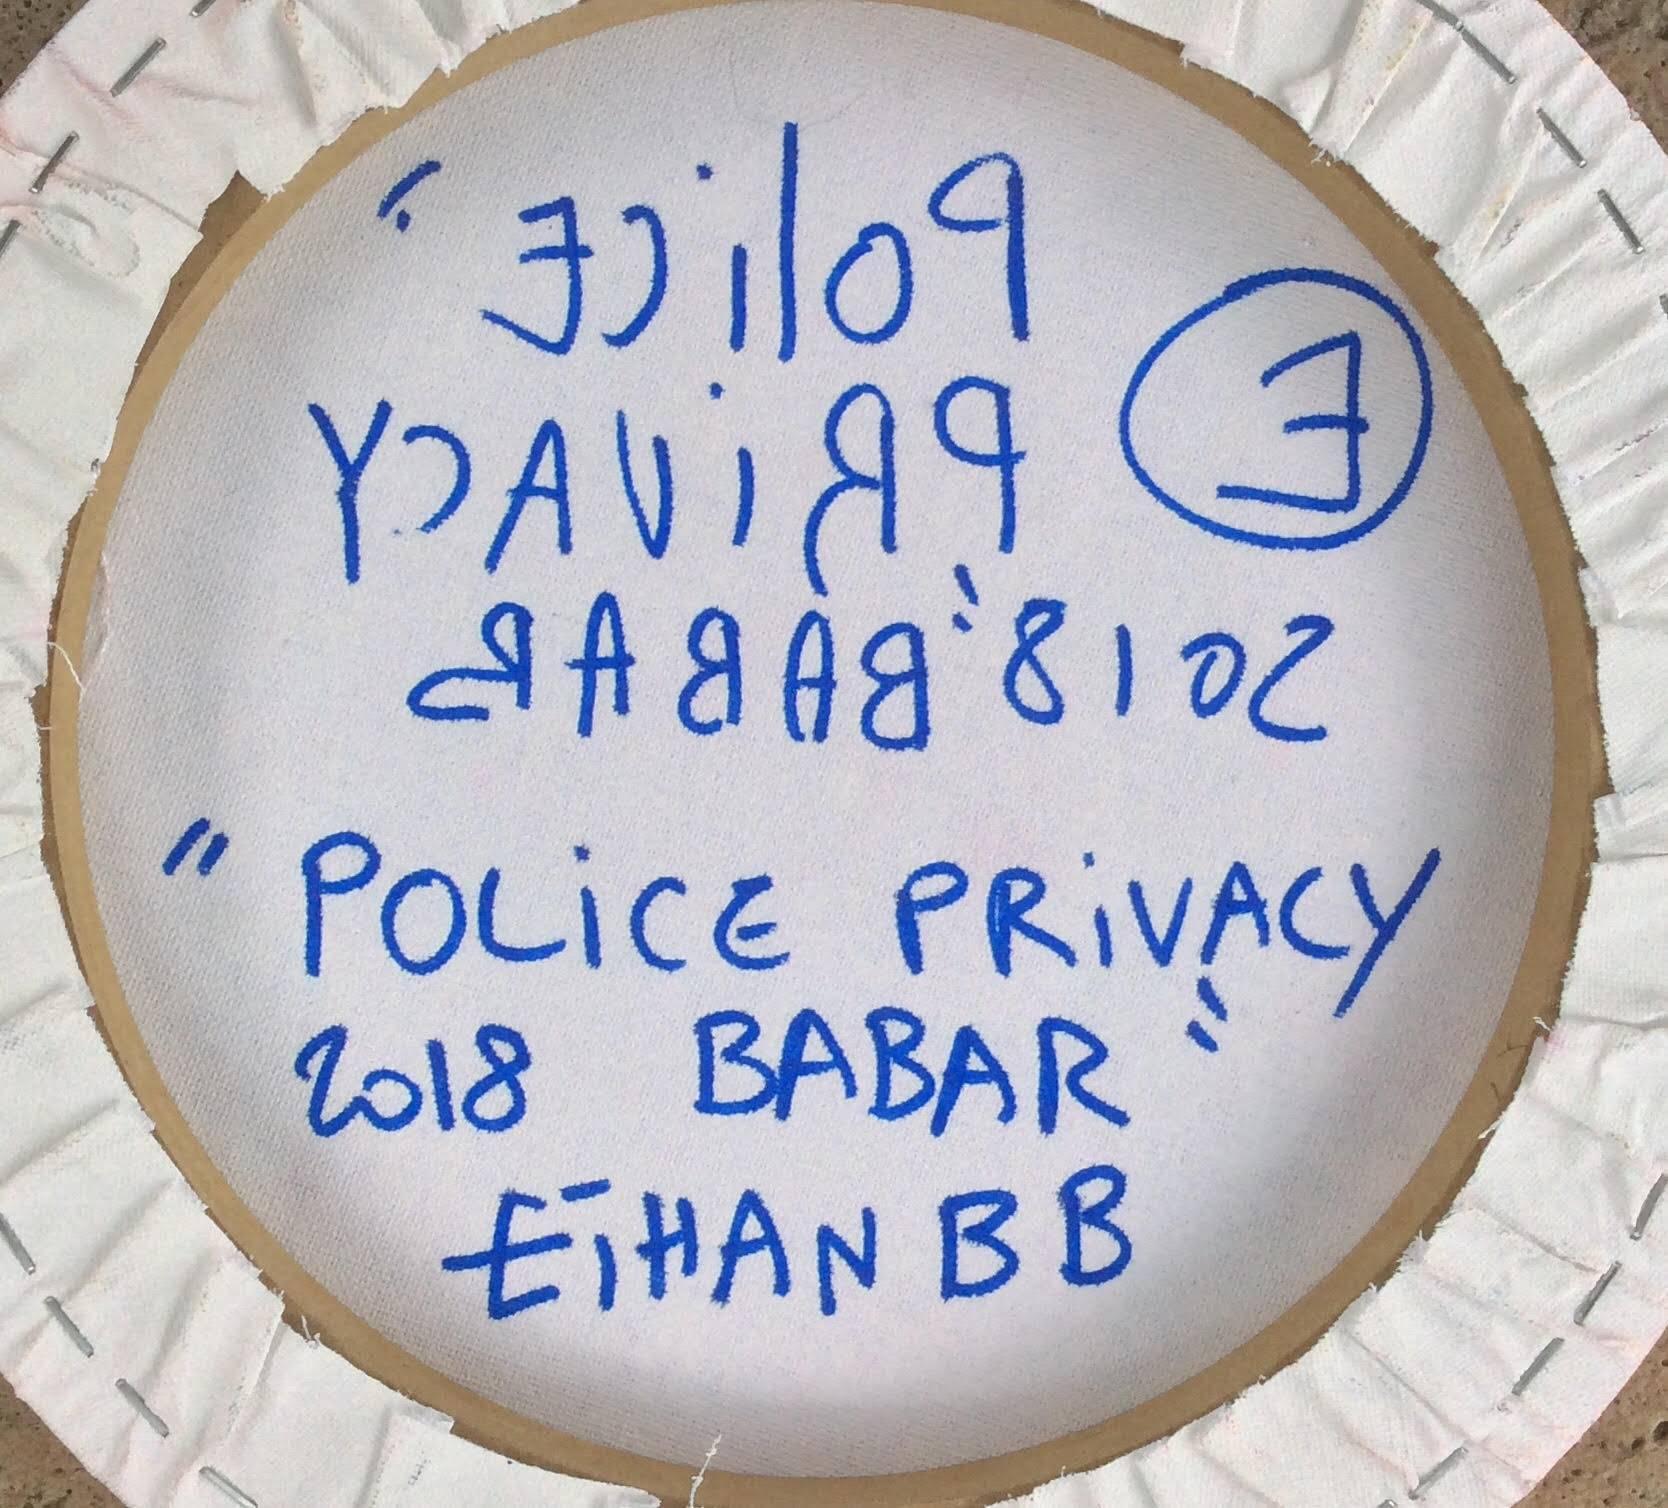 Police Privacy Babar 1